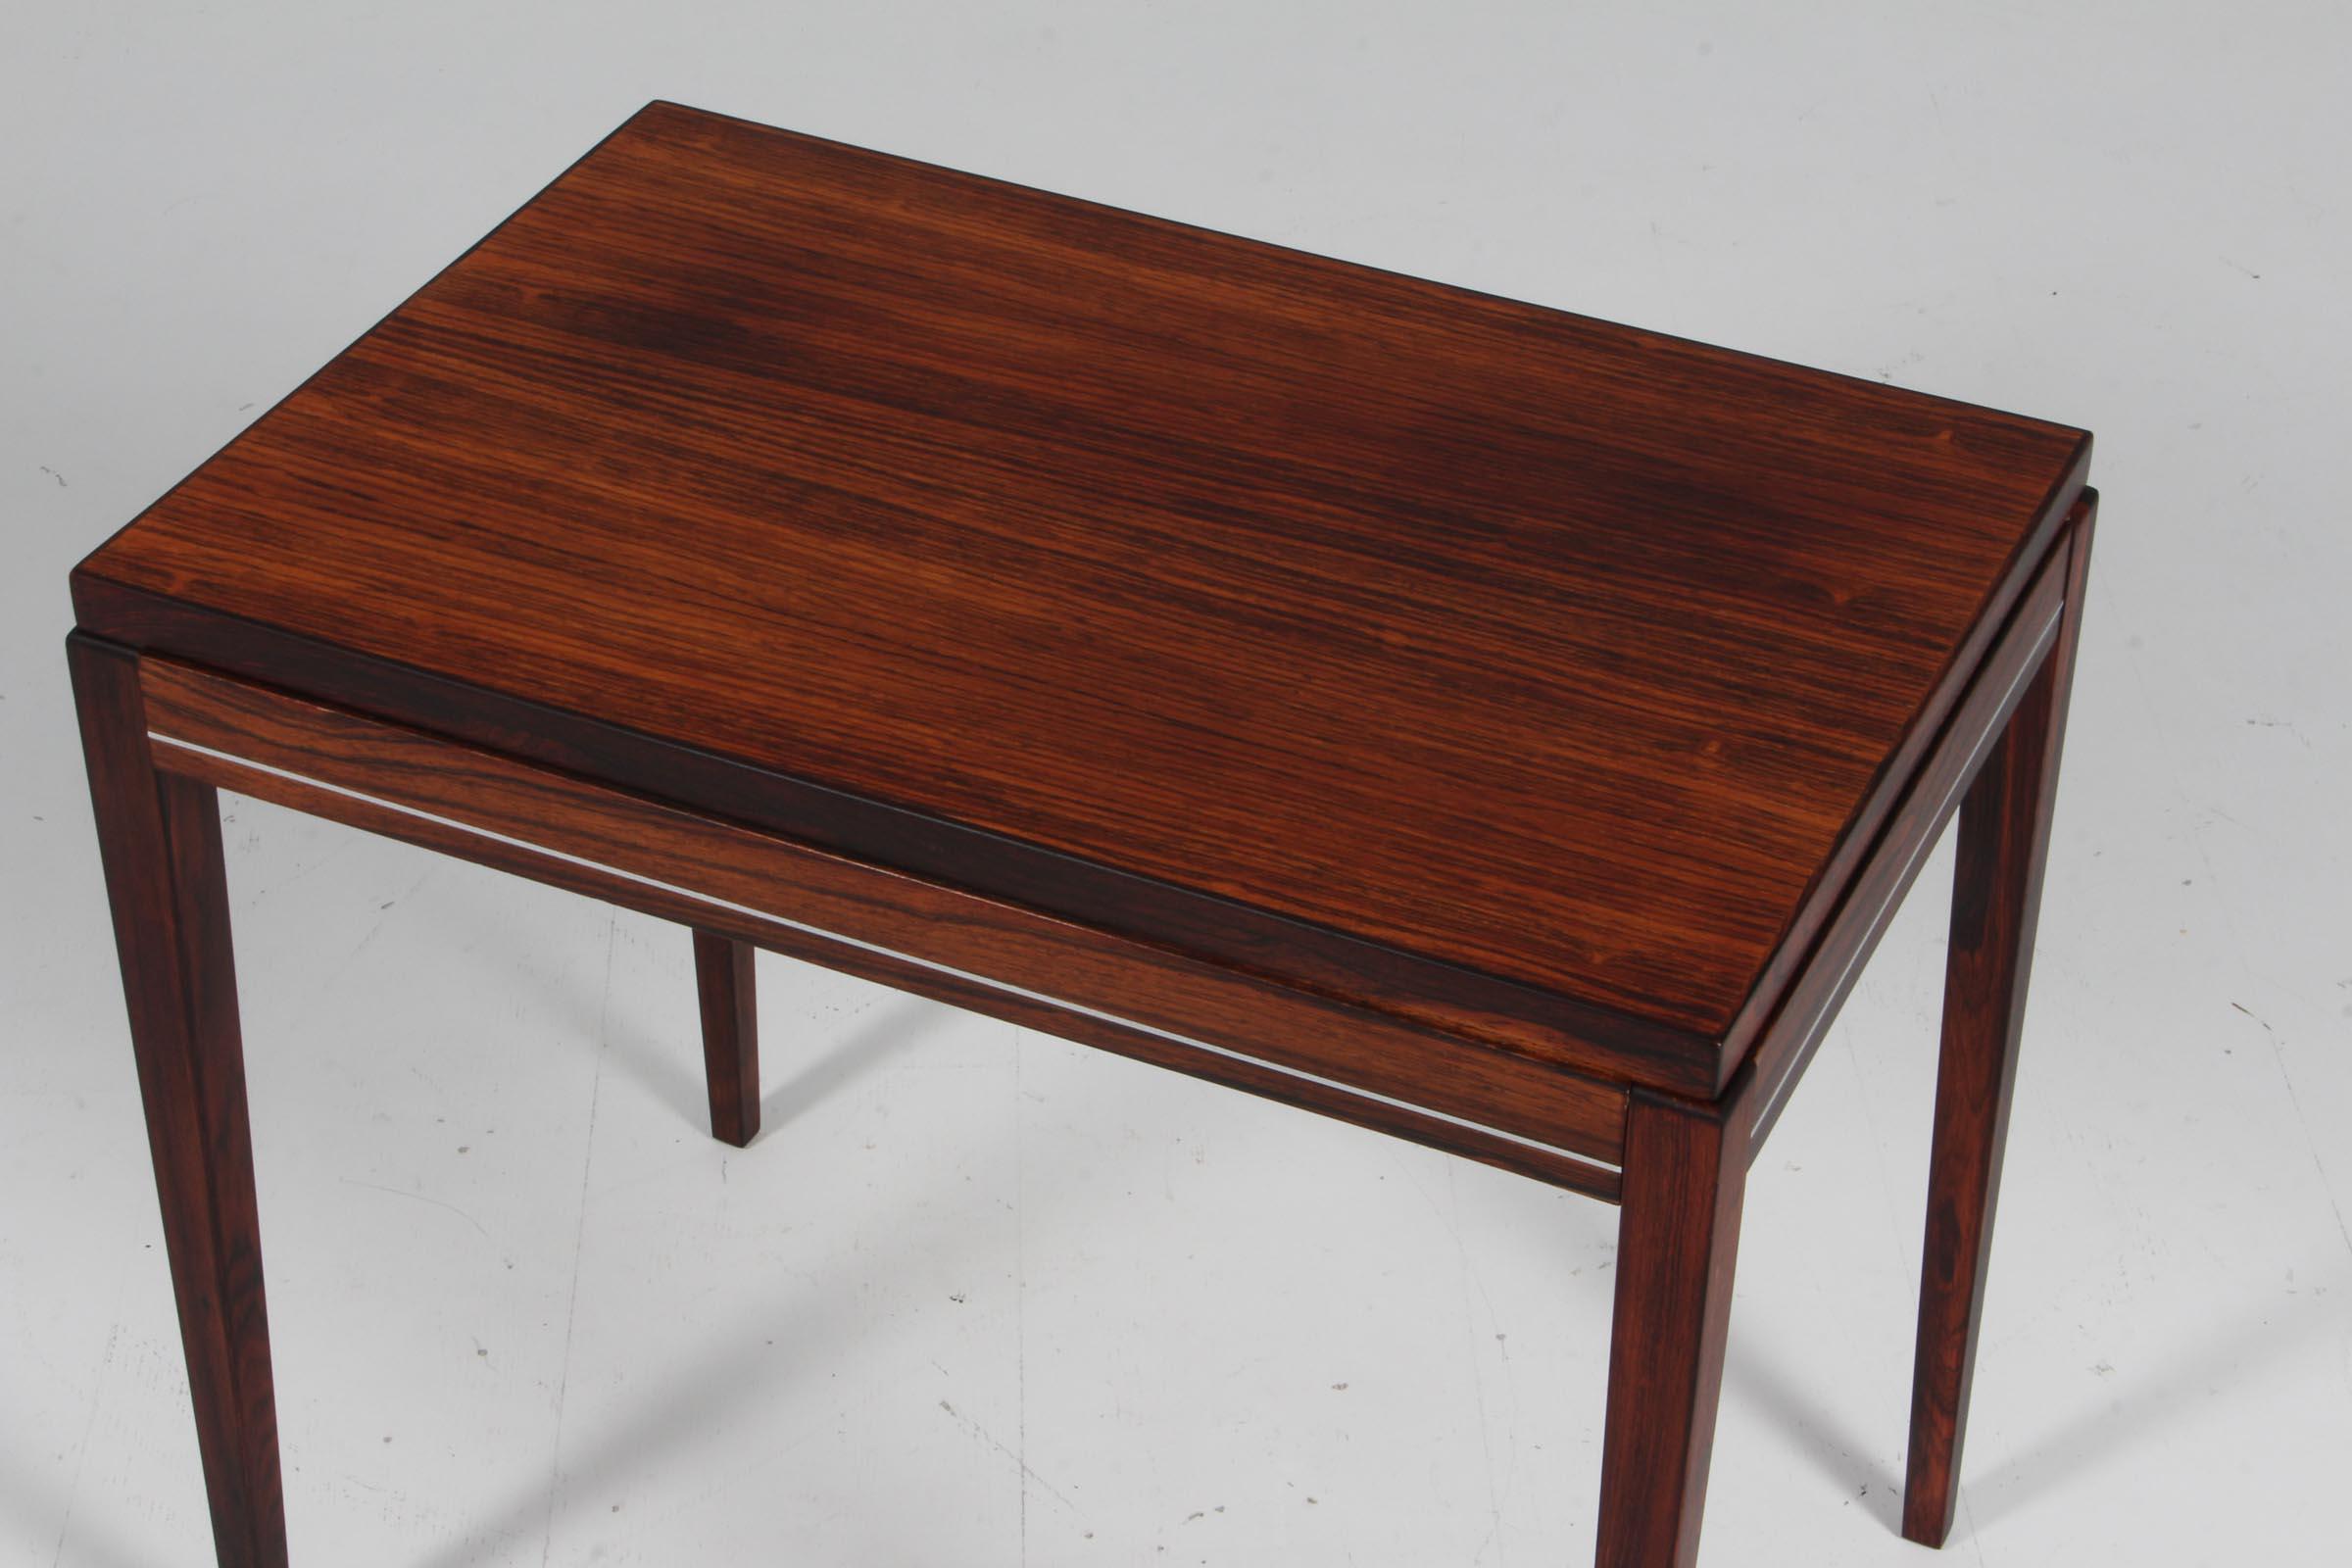 Frits Henningsen sofa table in rosewood, with aluminium details.

Made by Frits Henningsen in the 1950s.